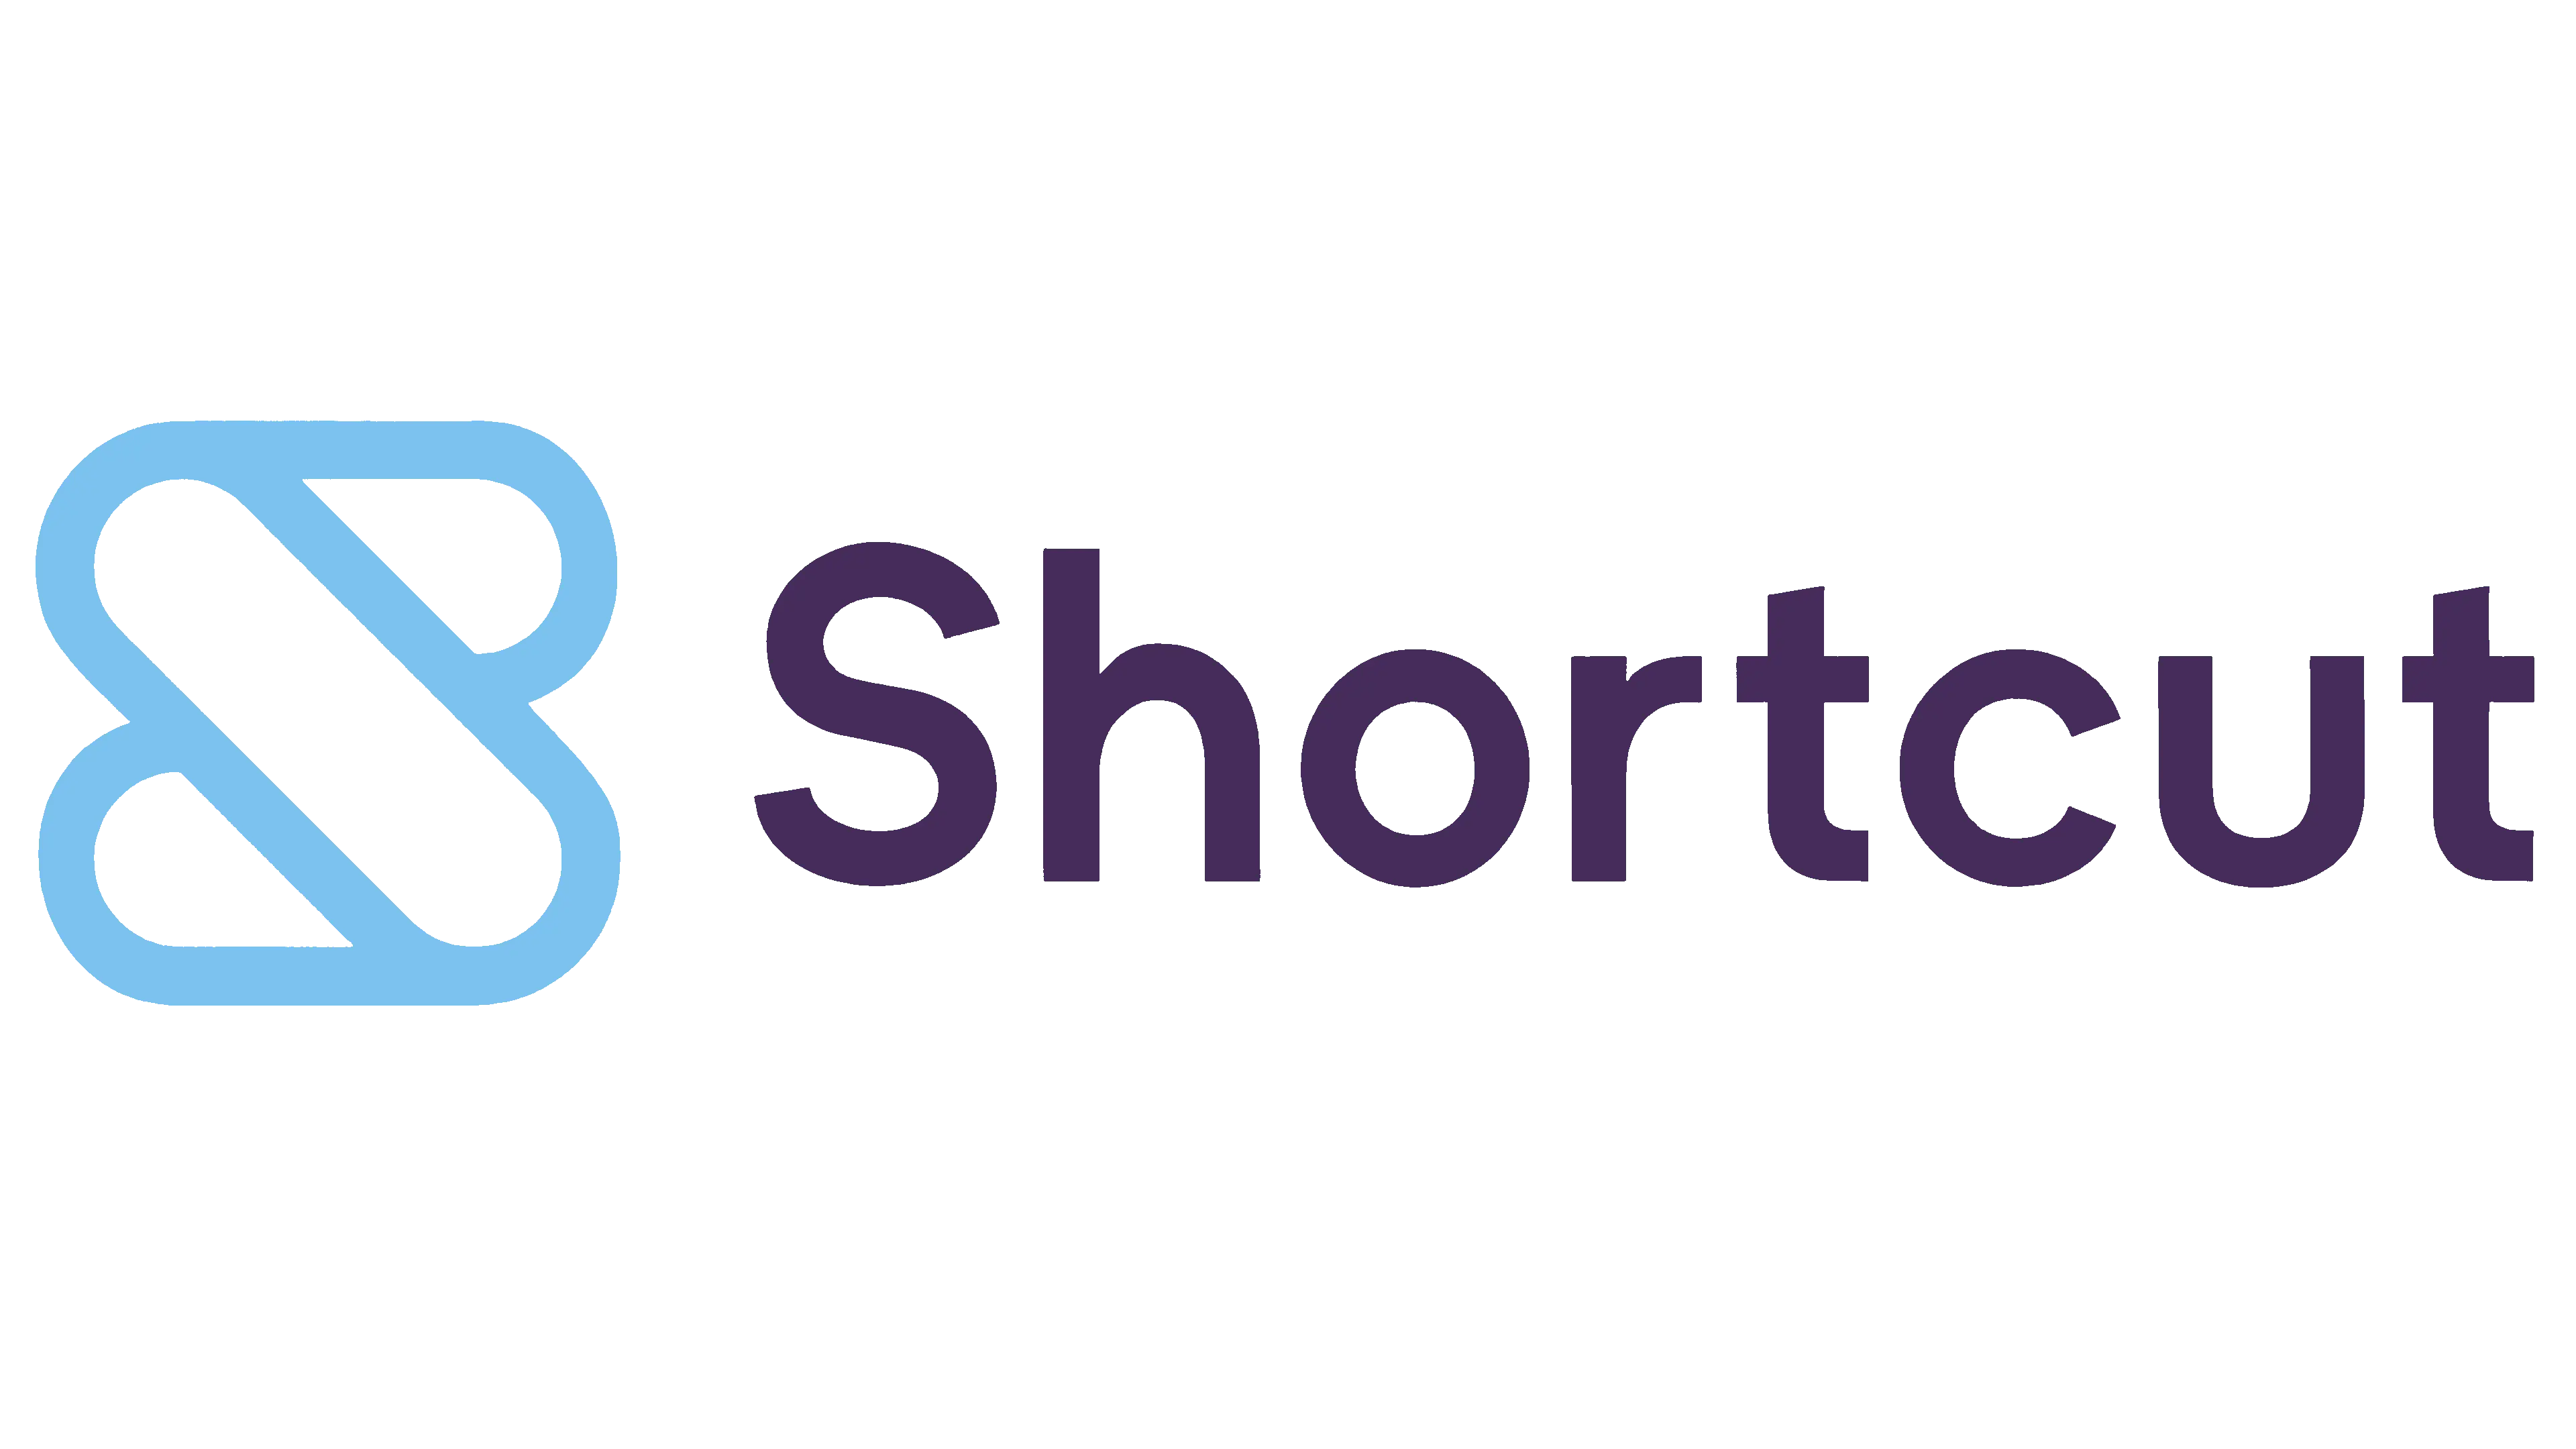 

Simply Business logo: "& Shortcut" - Success in business simplified